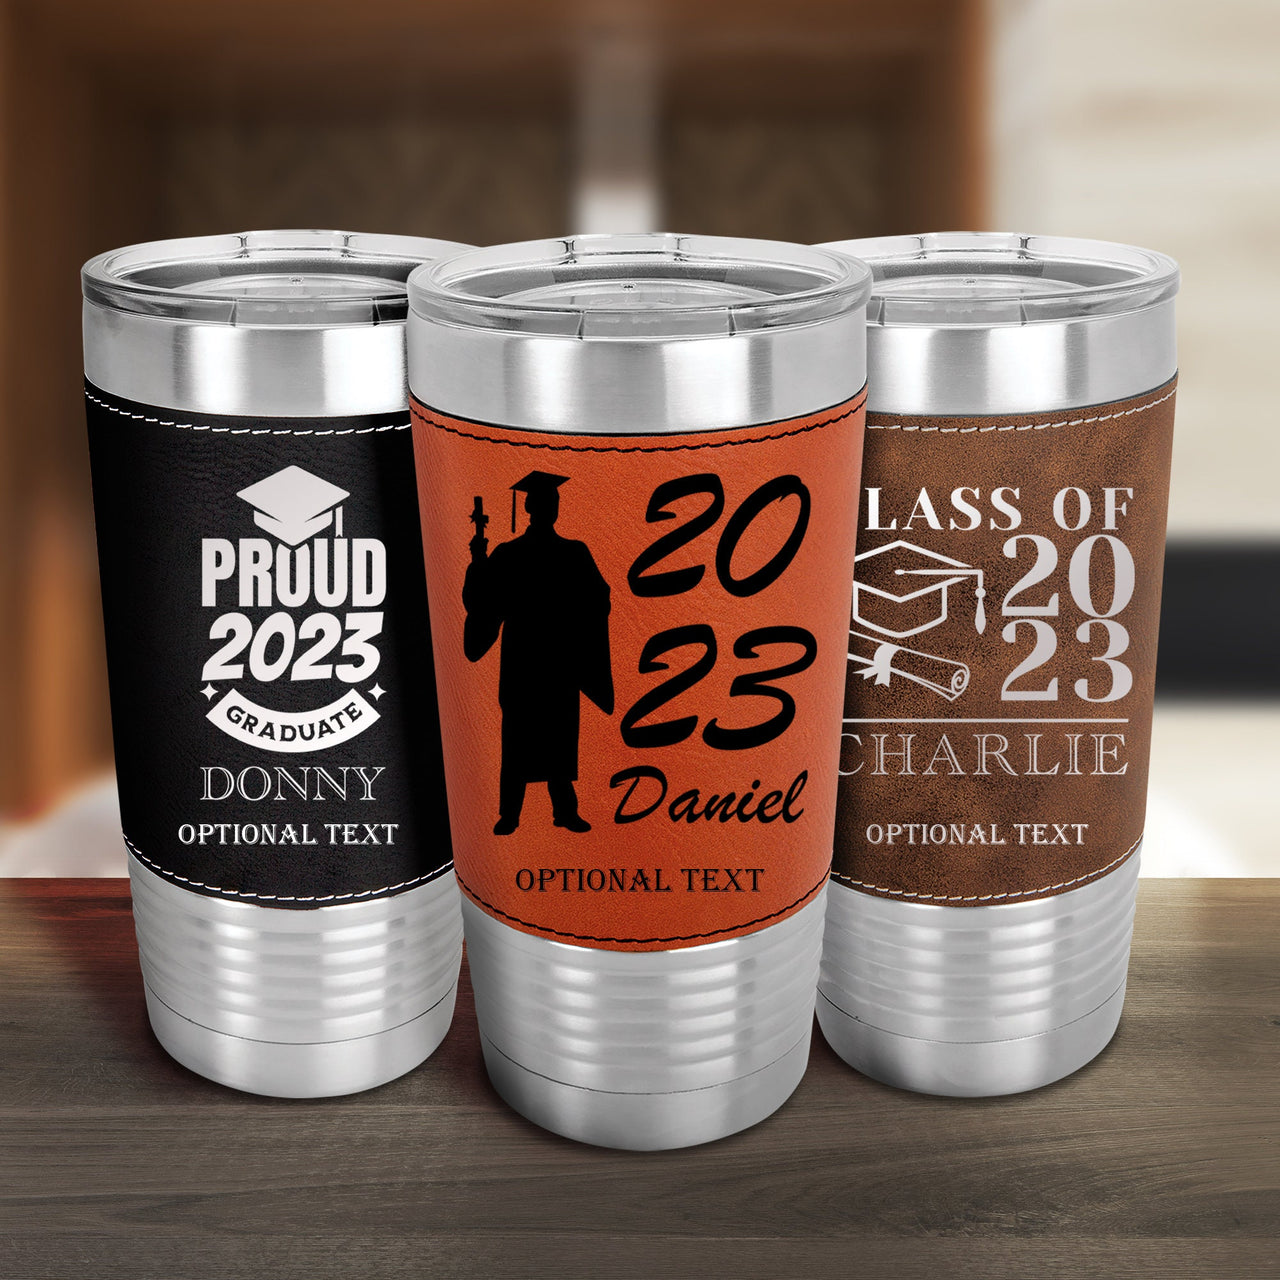 Personalized Leatherette Tumbler Graduation Gift 2023, Custom Name/Text Leather Tumbler Gifts for College Graduate, Cups Grad Gifts for Him